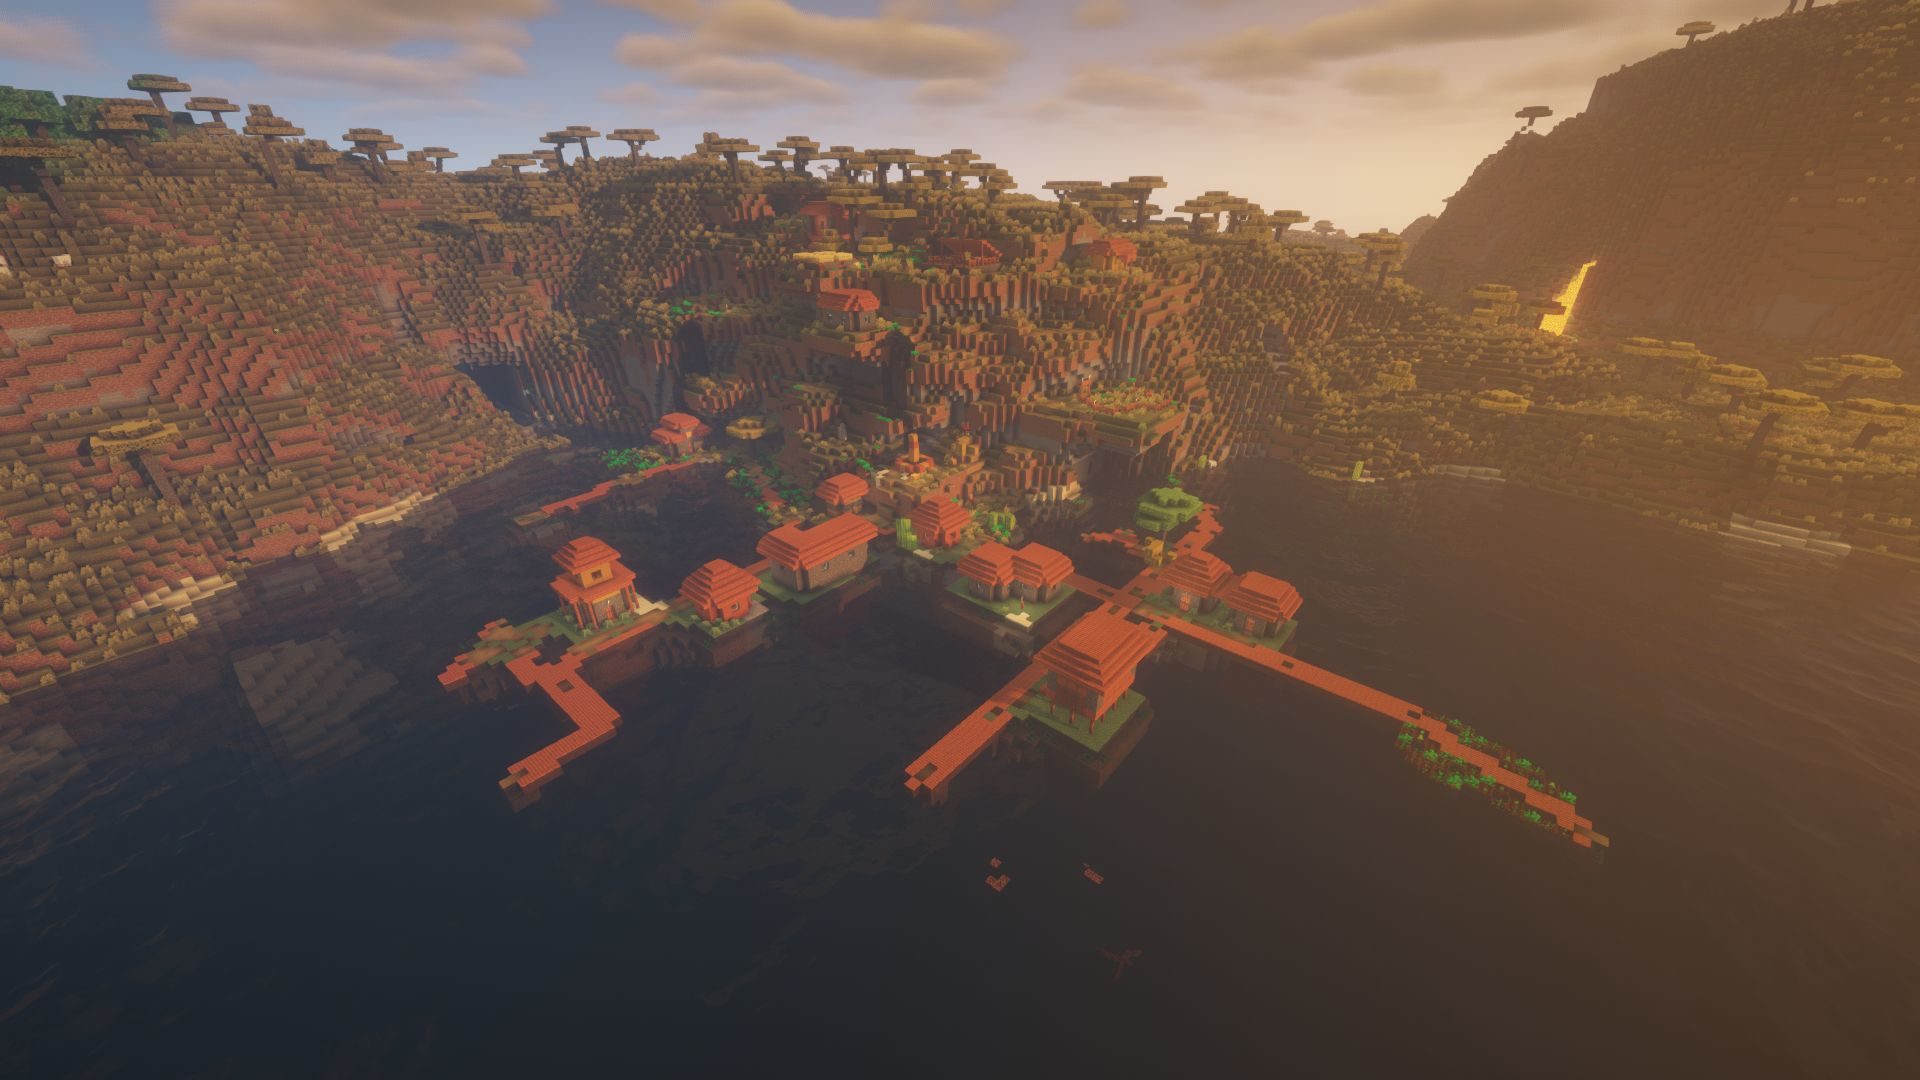 Overview of Minecraft Biomes in 2023